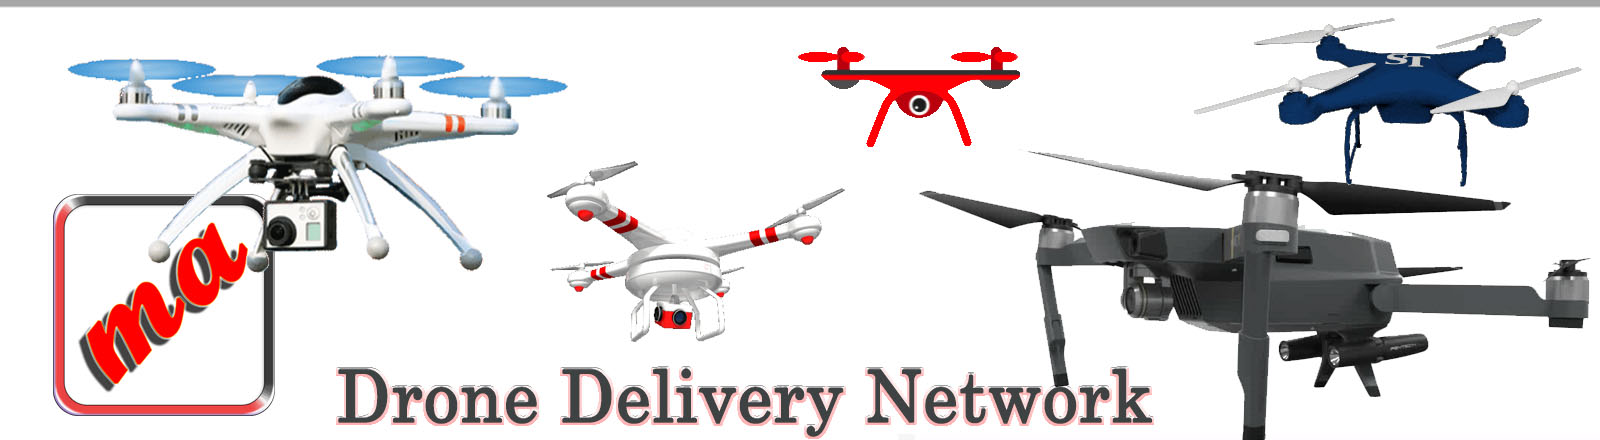 drone delivery network